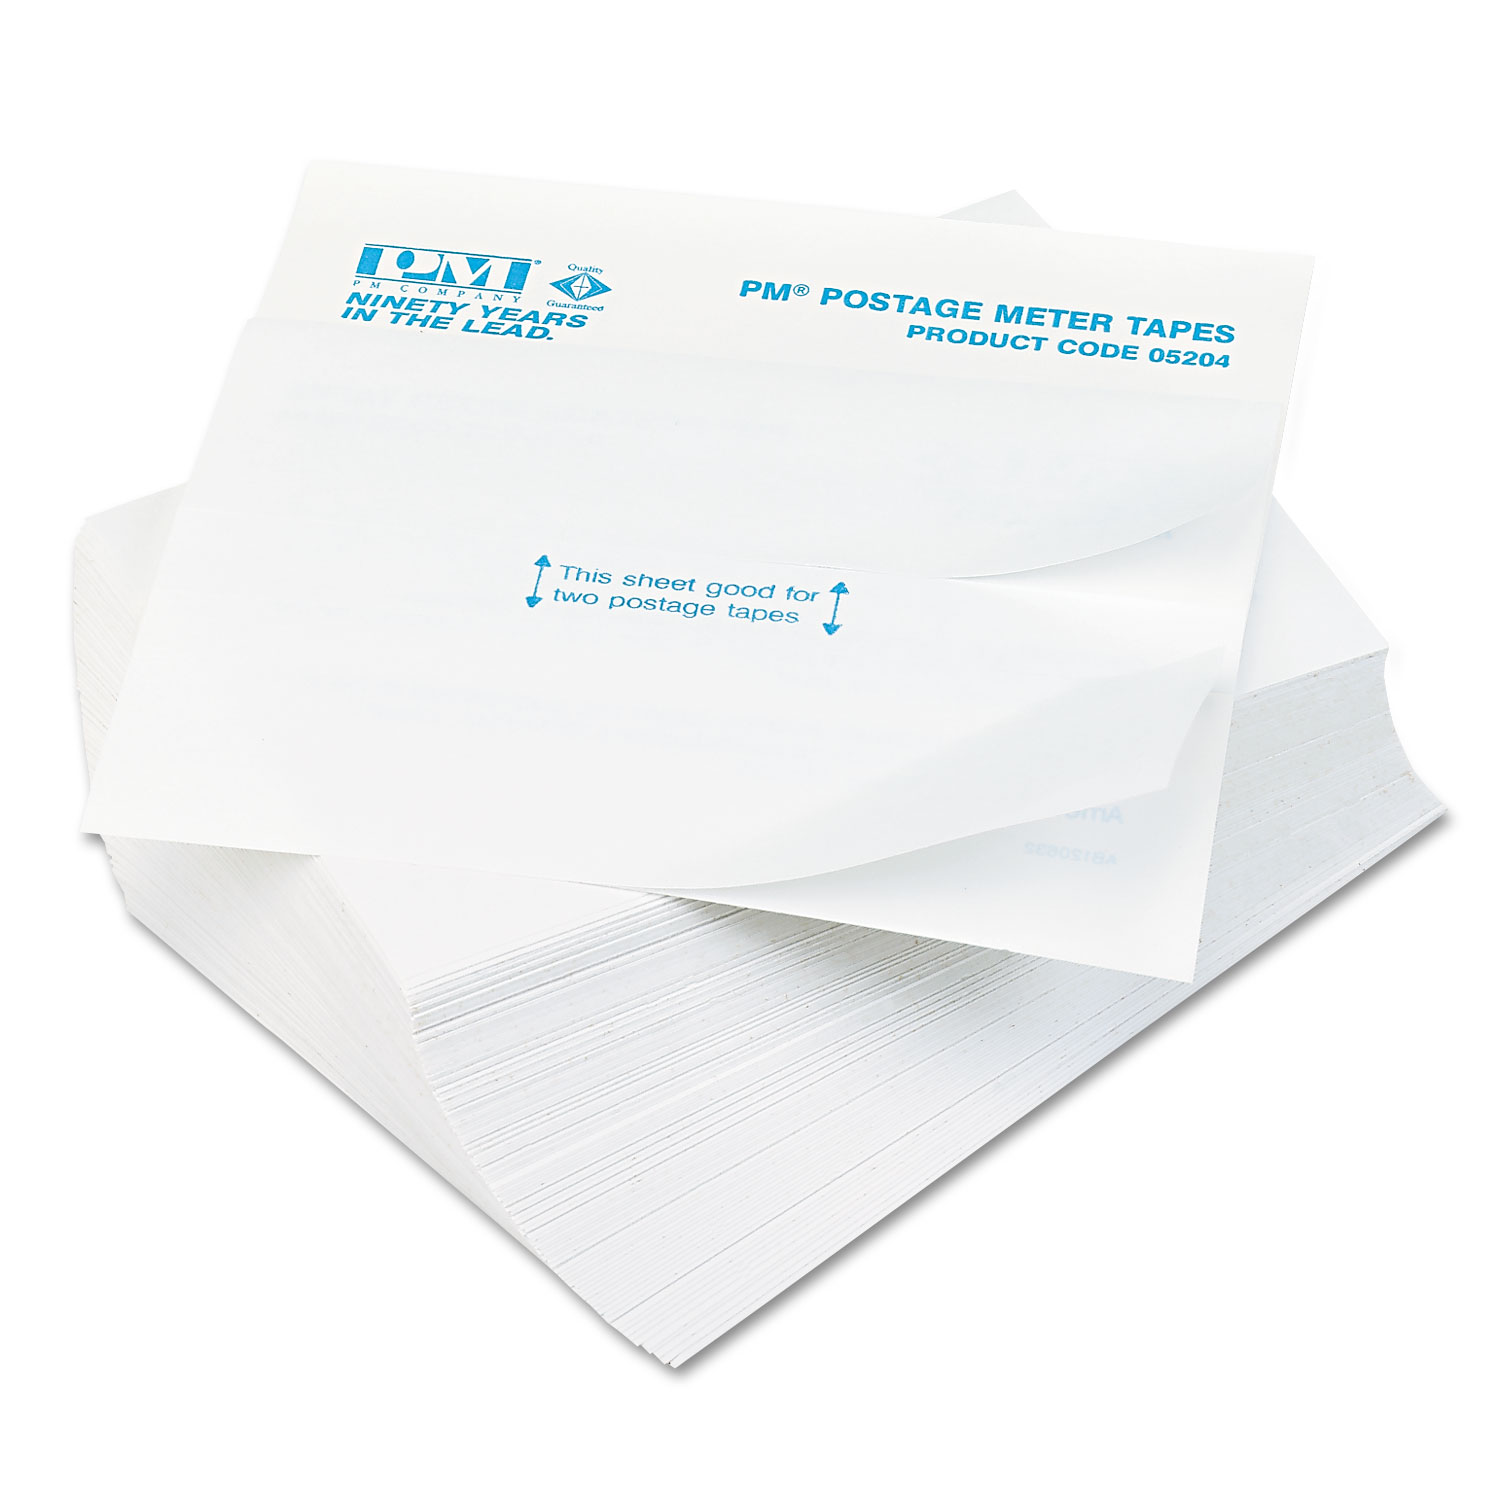  Iconex 5204 Postage Meter Labels, Double Tape Strips, 4 x 5.5 - 1.75 x 5.5, White, 2/Sheet, 150 Sheets/Pack (ICX94180303) 